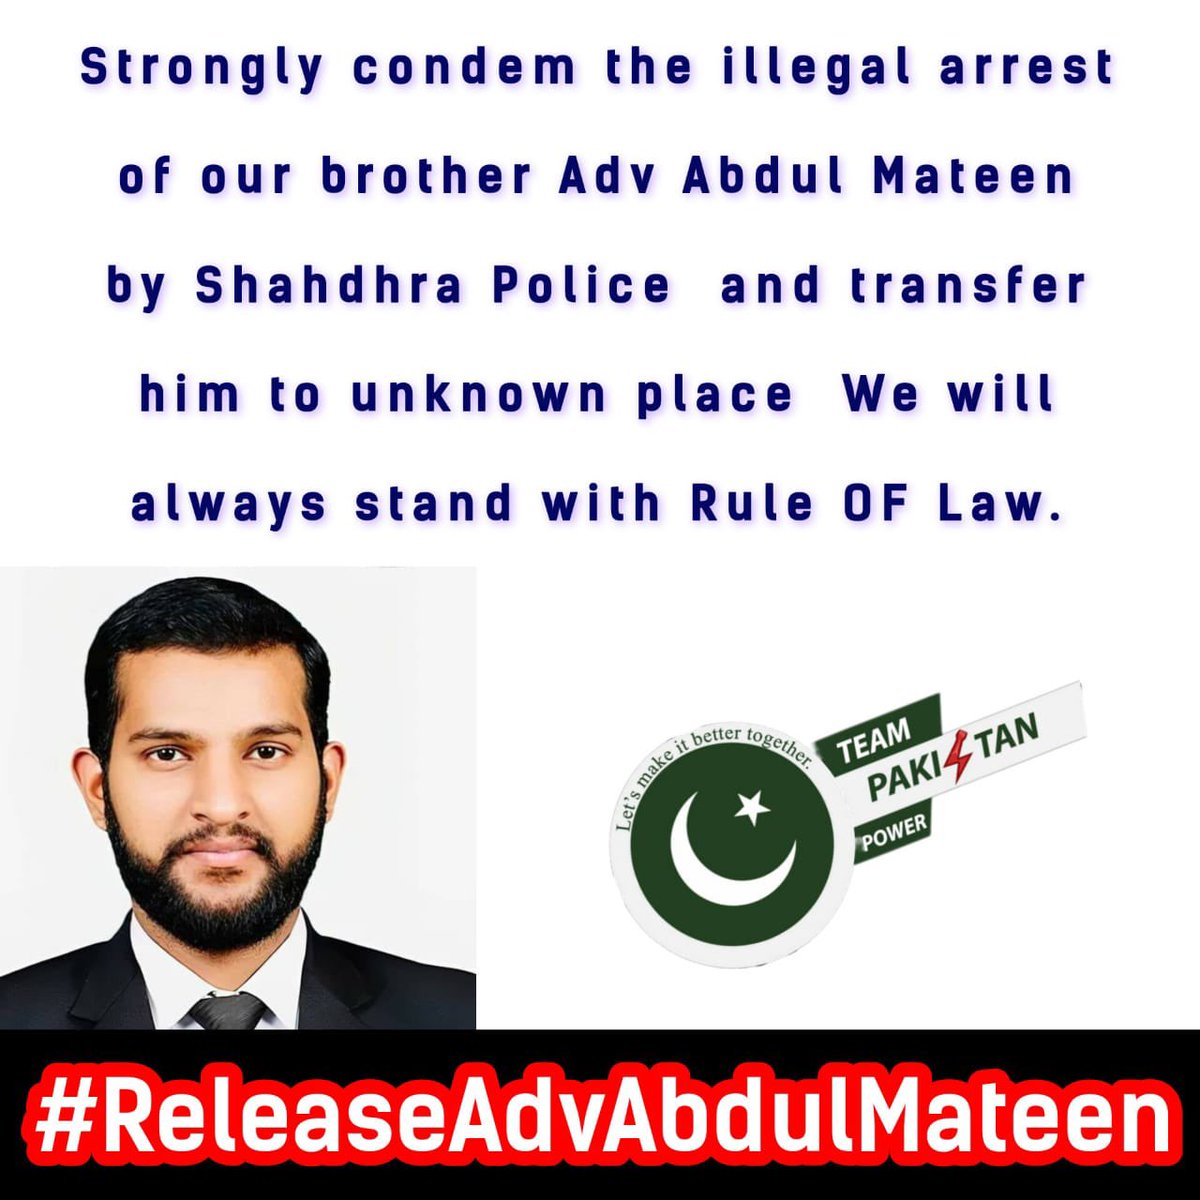 I..@tqb1468256.. want to say a life built on lies eventually falls to the ground, but truth offers a solid foundation. Adv. Abdul Mateen is doing a remarkable job but unfortunately he is arrested for no reason. #ReleaseAdvAbdulMateen is our demand.@TeamPakPower